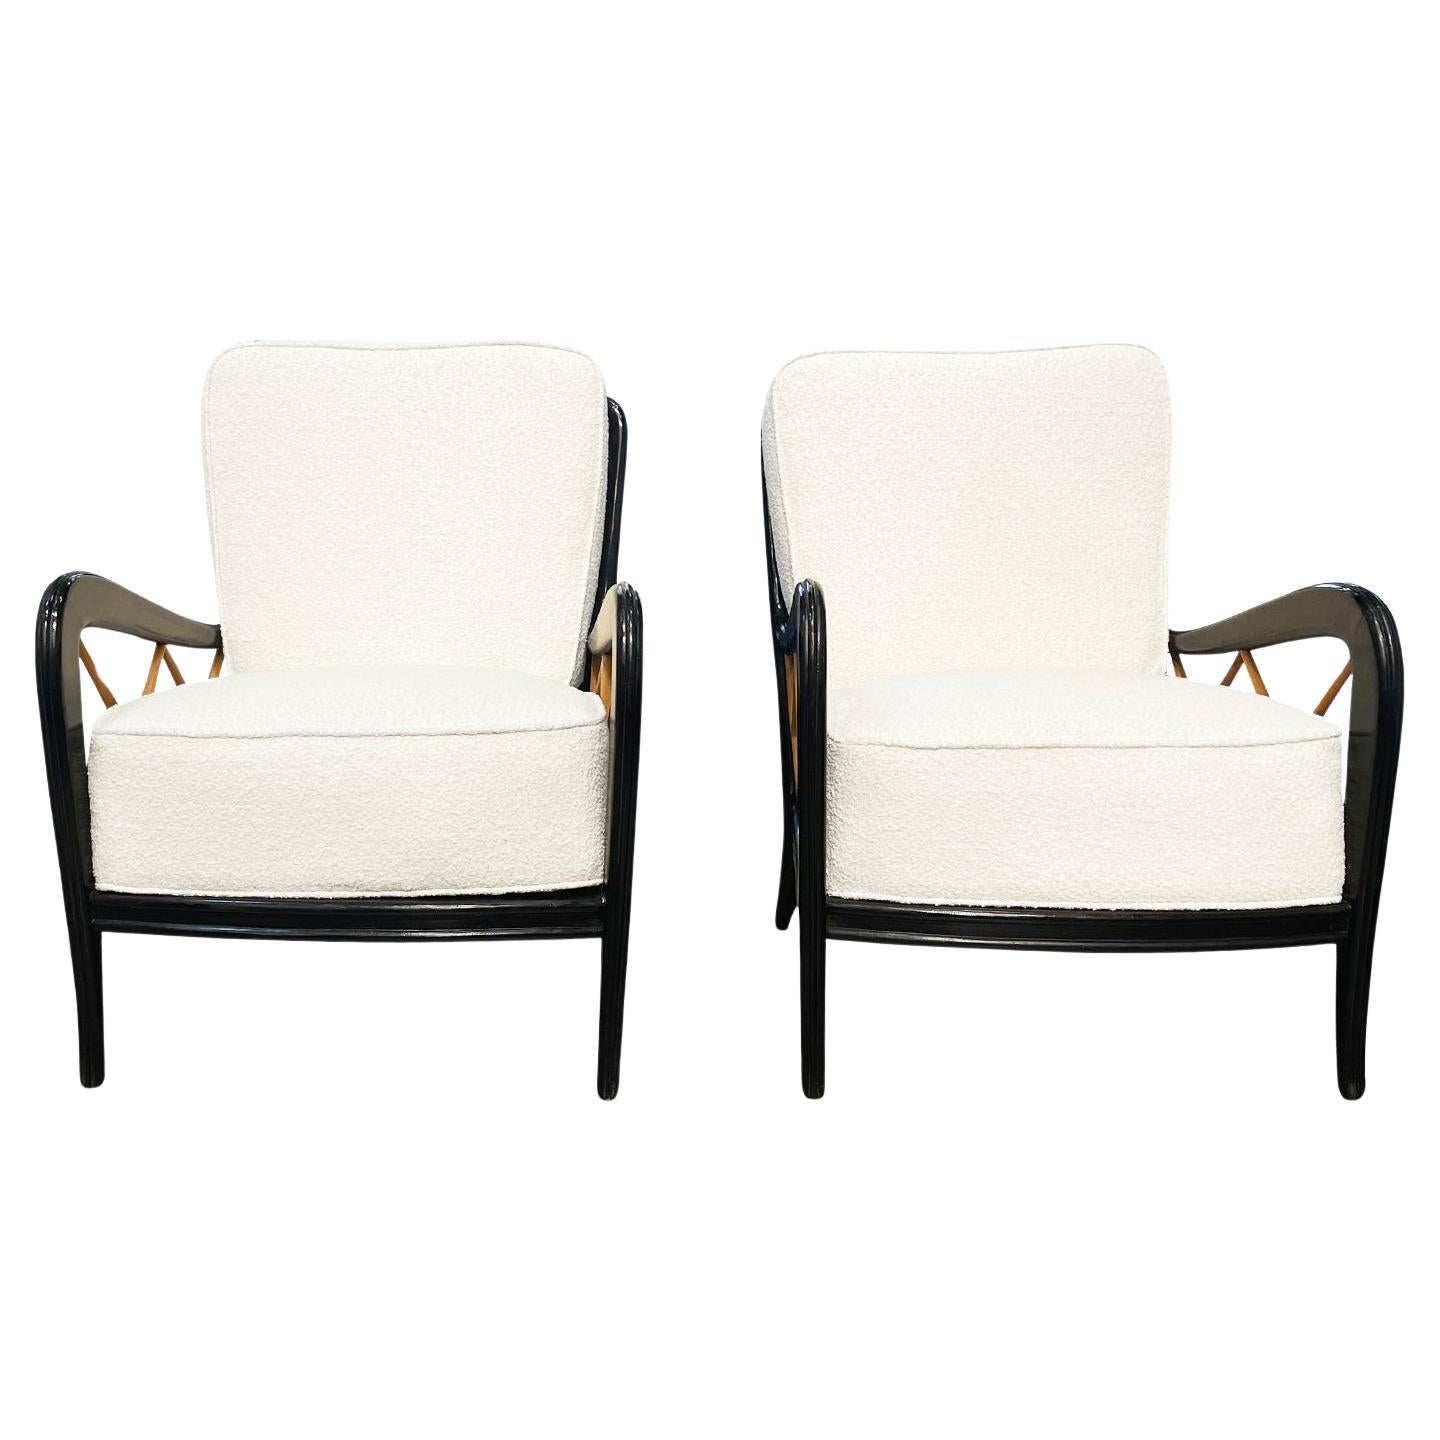 20th Century Italian Pair of Beech, Maplewood Lounge Chairs by Paolo Buffa For Sale